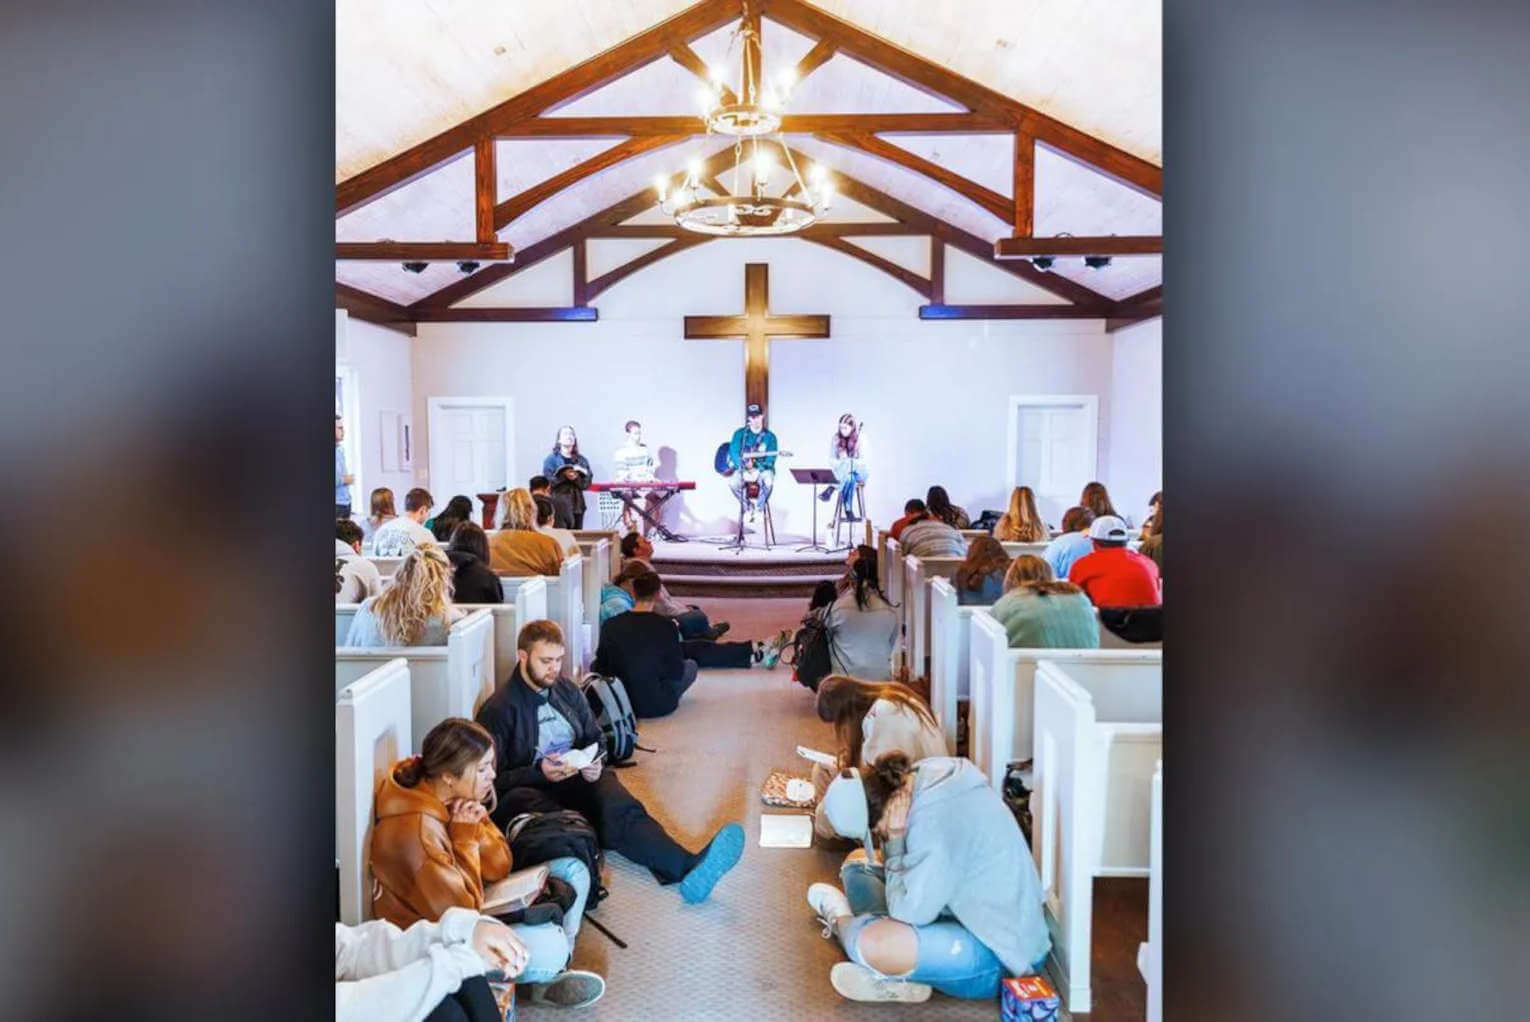 ‘Literally Overflowing’: Hundreds of Liberty Students Pack Prayer Chapel for 24 Hours of Revival